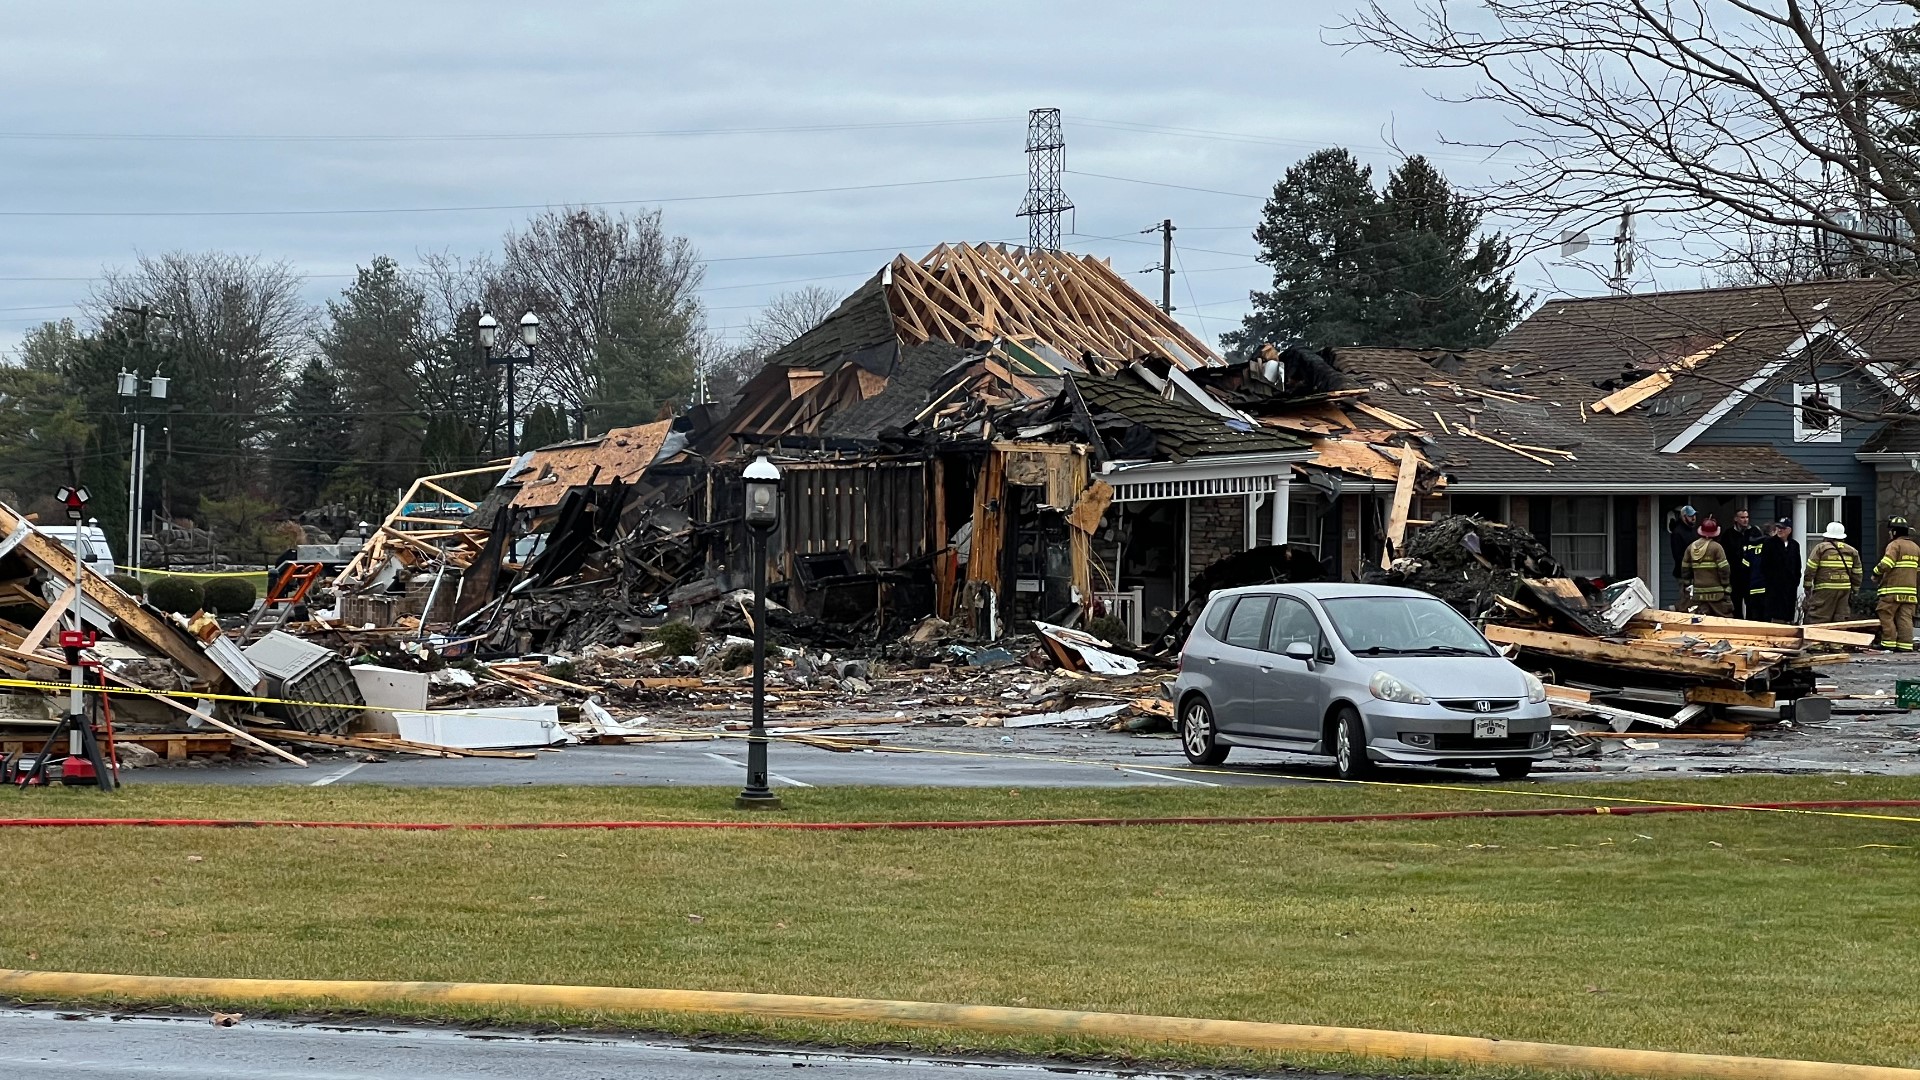 The explosion blew the Bird-in-Hand Family Inn's roof completely off the building one week before Christmas, killing an employee.